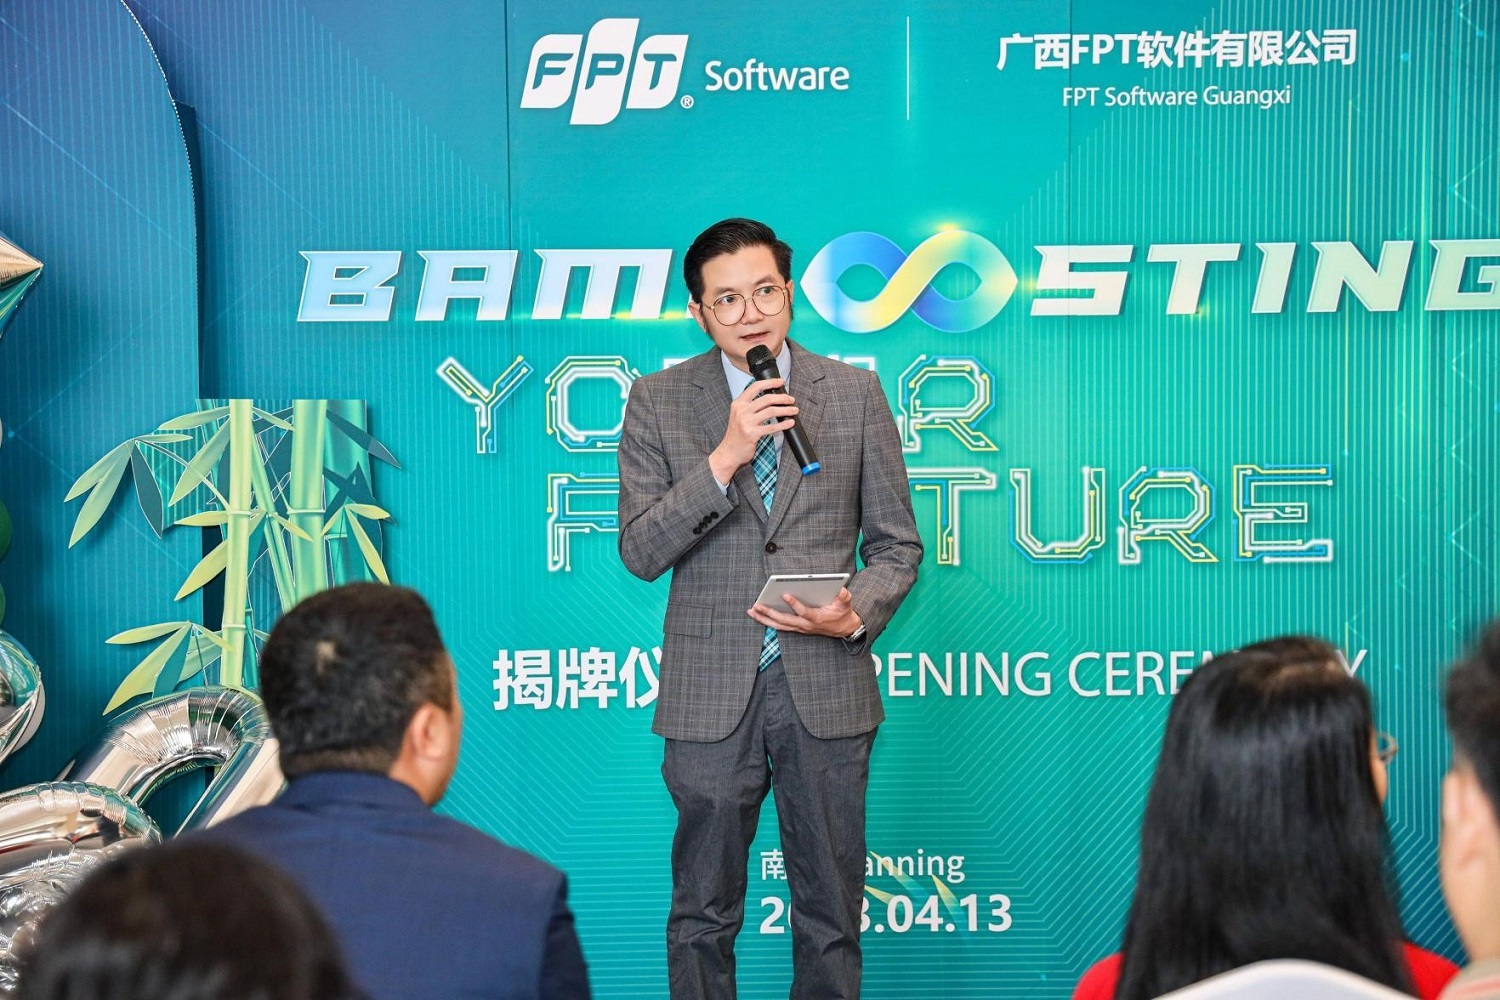 Consul General Do Nam Trung delivered a speech at the inauguration ceremony of FPT's Software Development Center in Nanning, China.